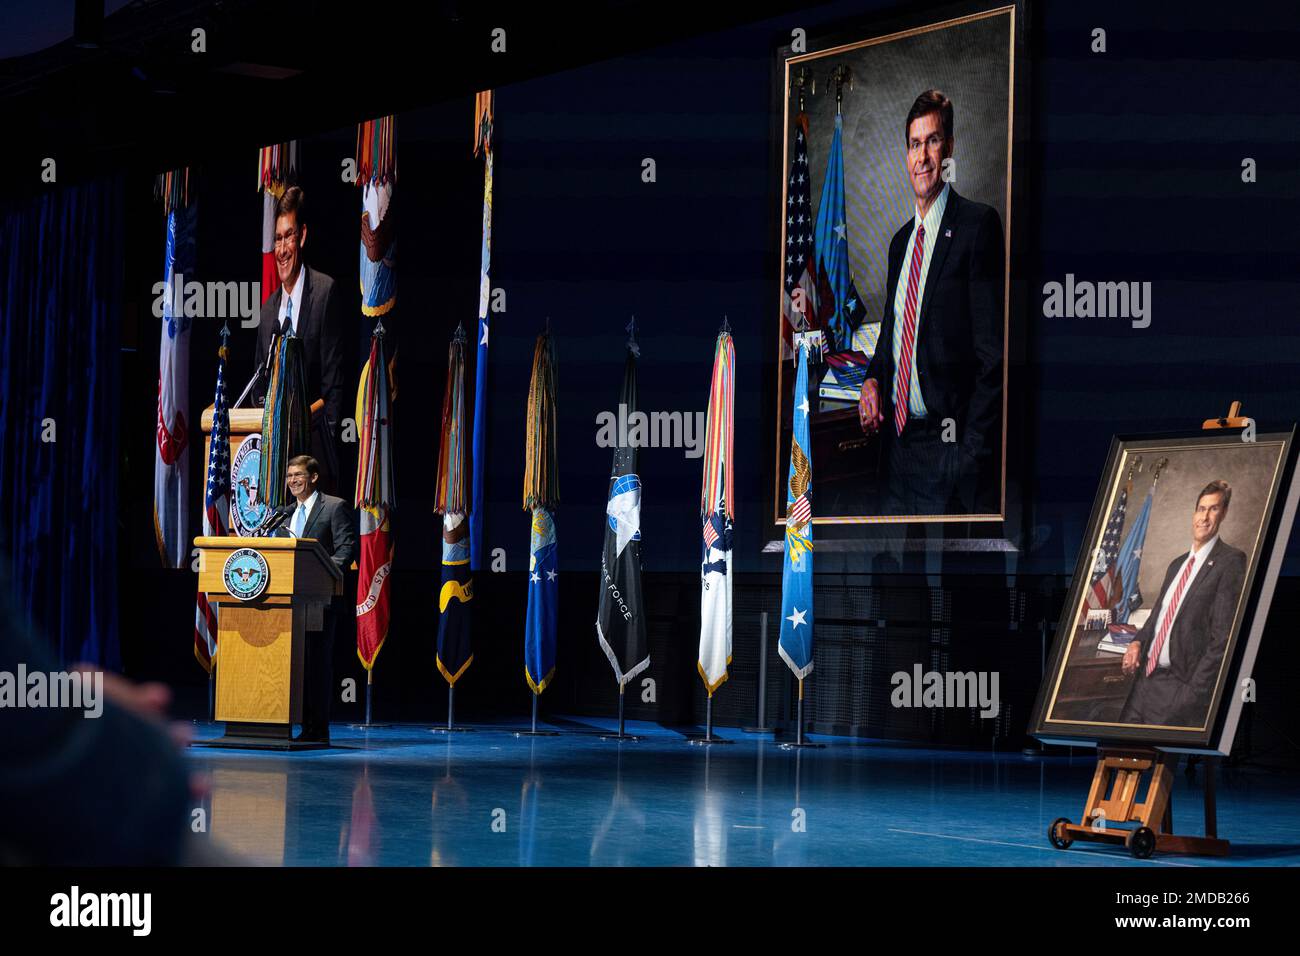 Former Secretary of Defense Mark Esper speaks at his official portrait unveiling ceremony at Joint Base Myer-Henderson Hall, Va., July 15, 2021. (DoD photo by U.S. Navy Petty Officer 2nd Class Alexander Kubitza) Stock Photo